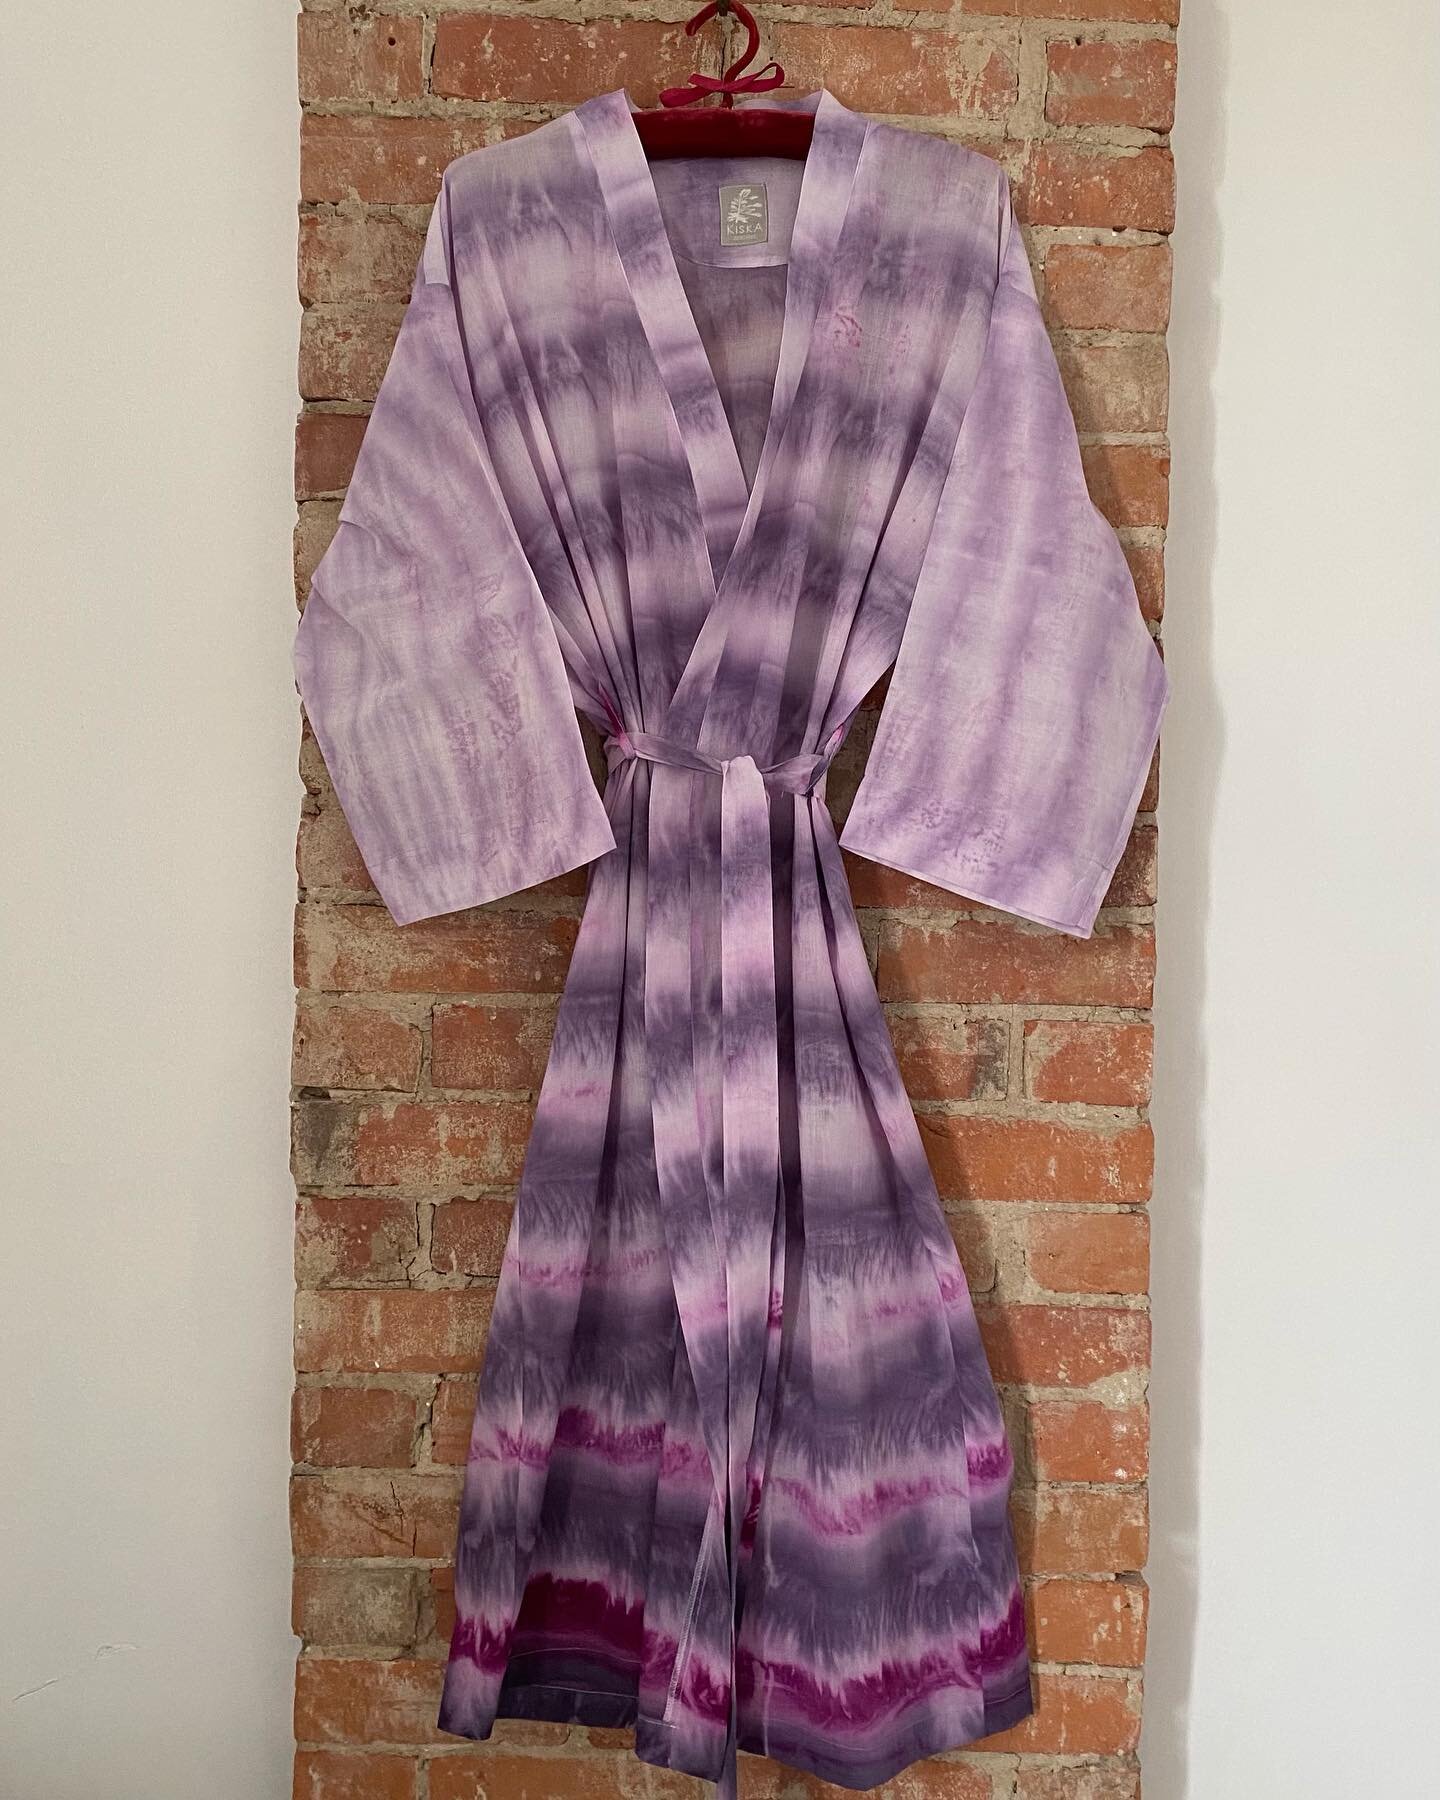 Indoor Fireworks !!! 

Working on getting the new shibori updates to the website. 

Until then DM for info or to purchase !